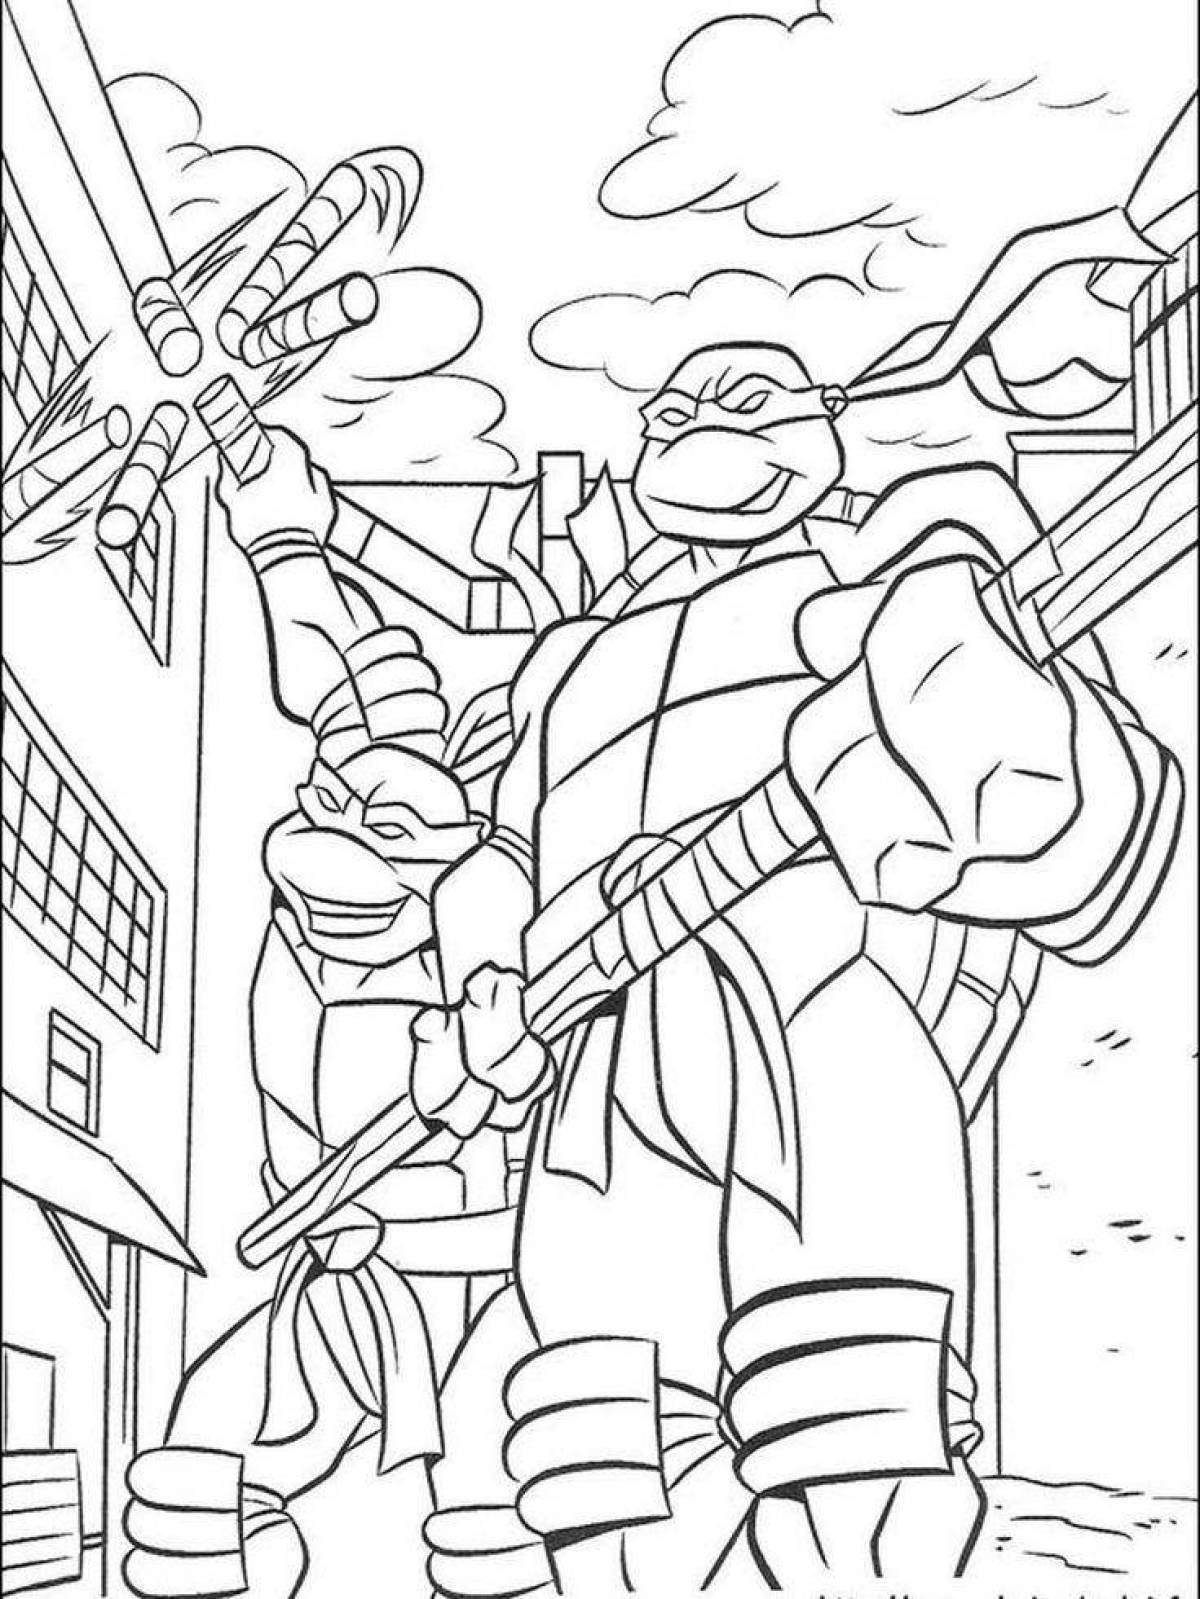 Dazzling Teenage Mutant Ninja Turtles coloring pages for boys